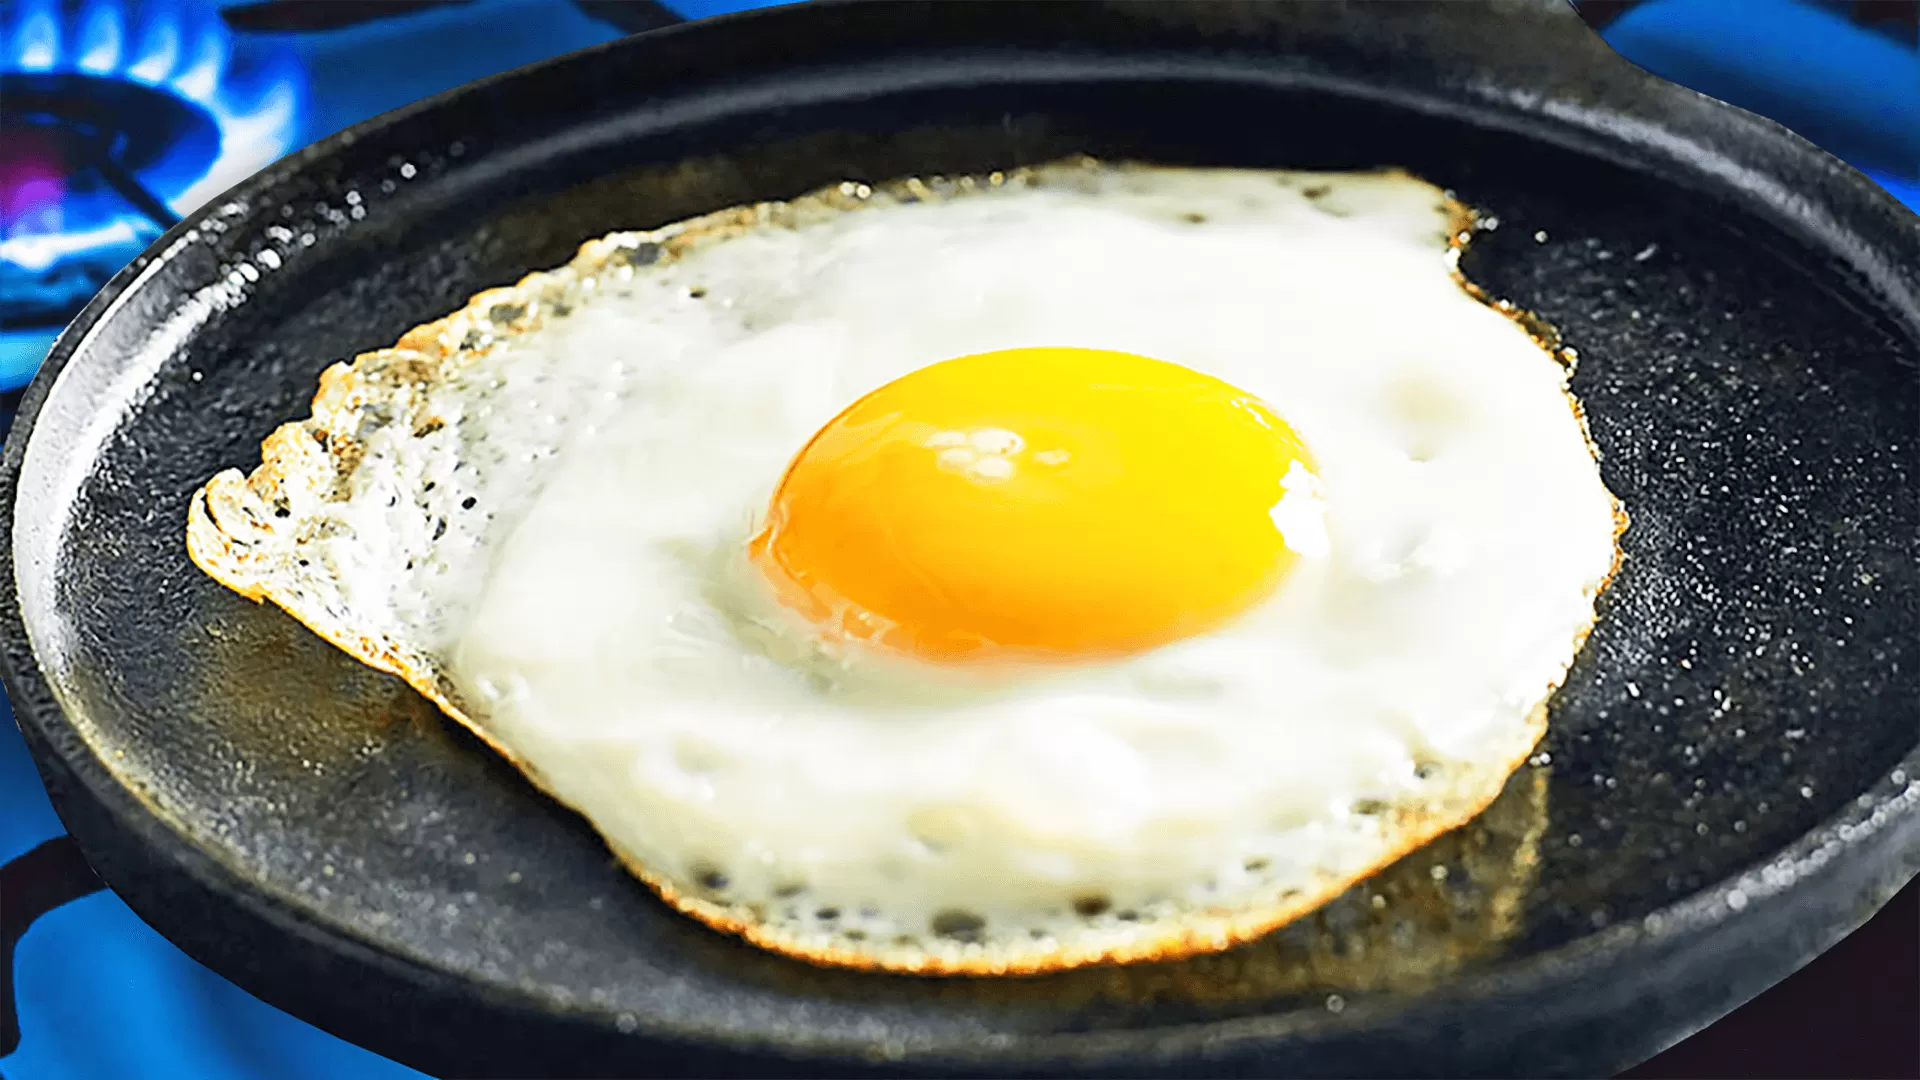 Cooking Sunny Side Up Eggs in a Pan on the Stove.